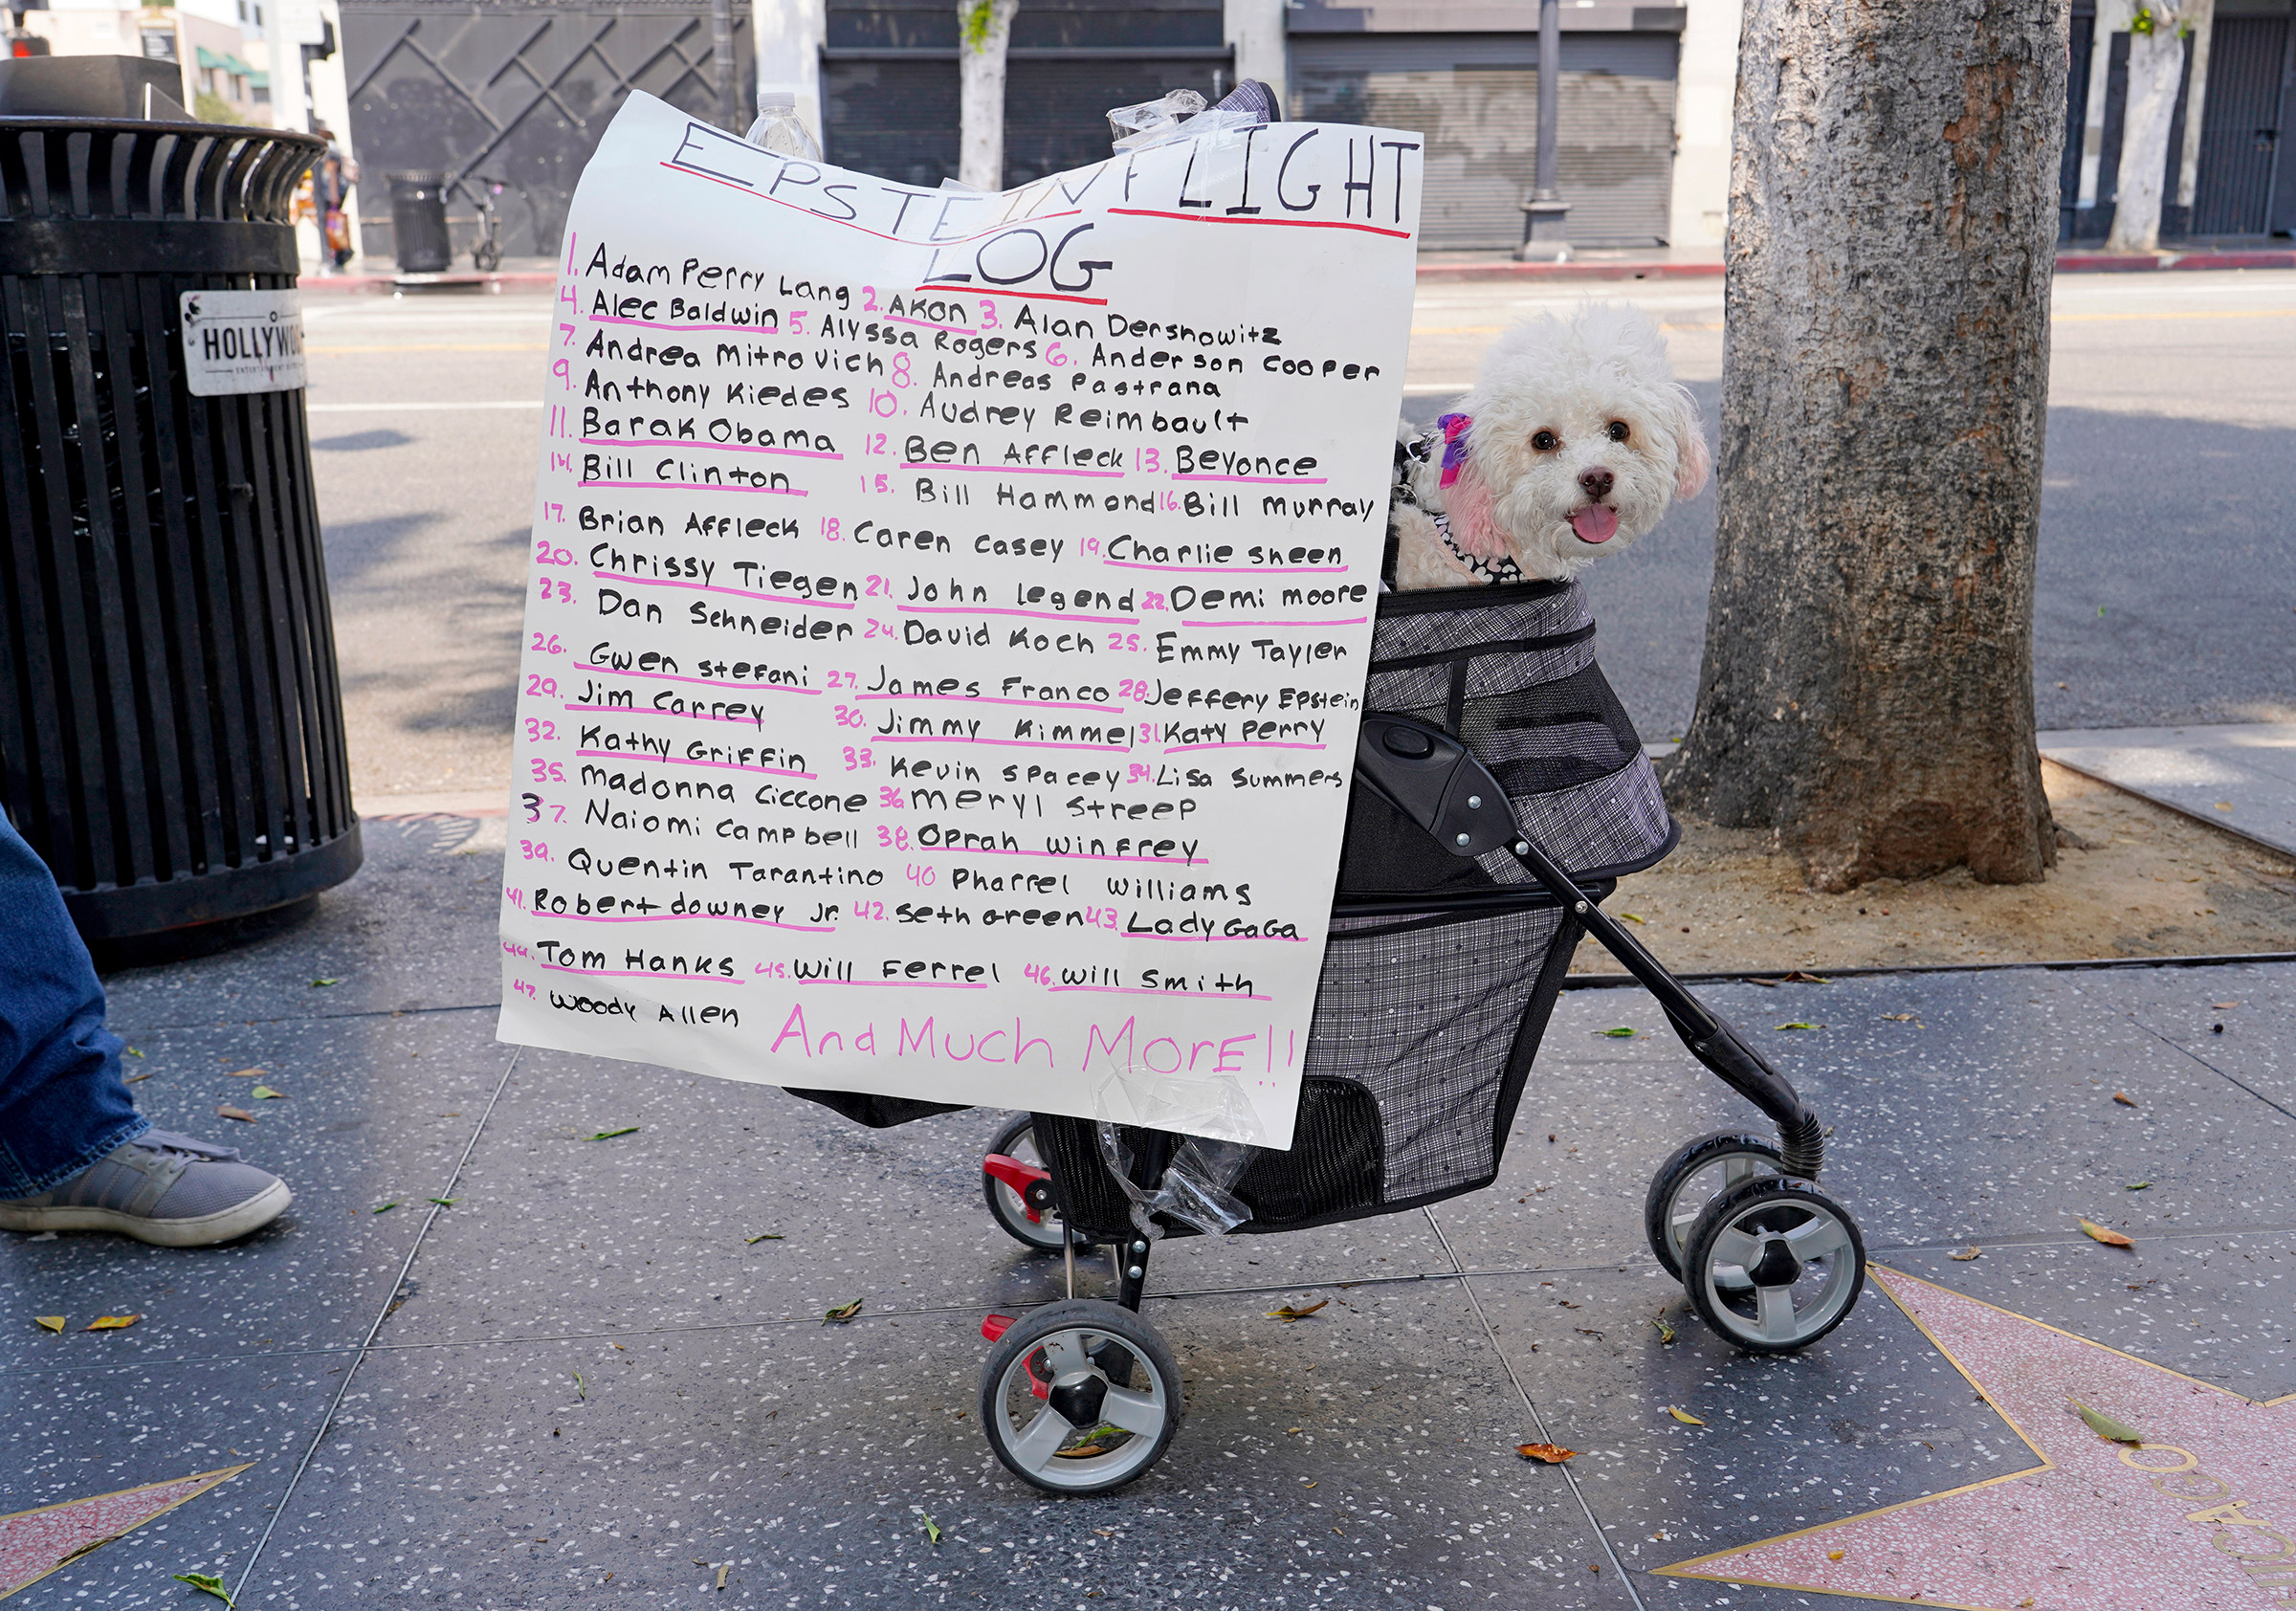 A sign at a Save Our Children rally in Los Angeles, Aug. 22, 2020. (Jamie Lee Curtis Taete)